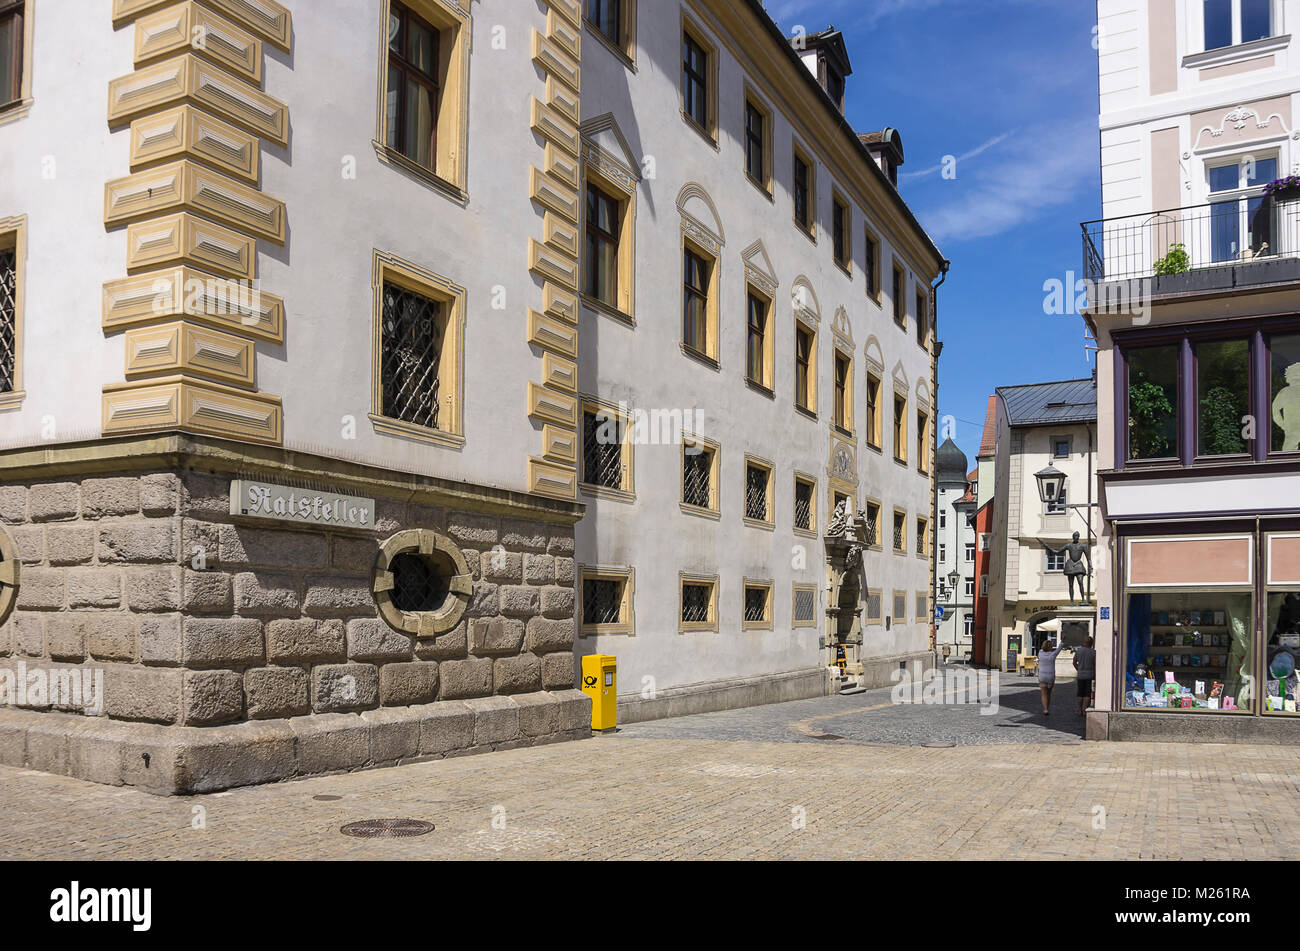 The historical Ratskeller (cellar of the town hall) in Regensburg, Bavaria, Germany. Stock Photo